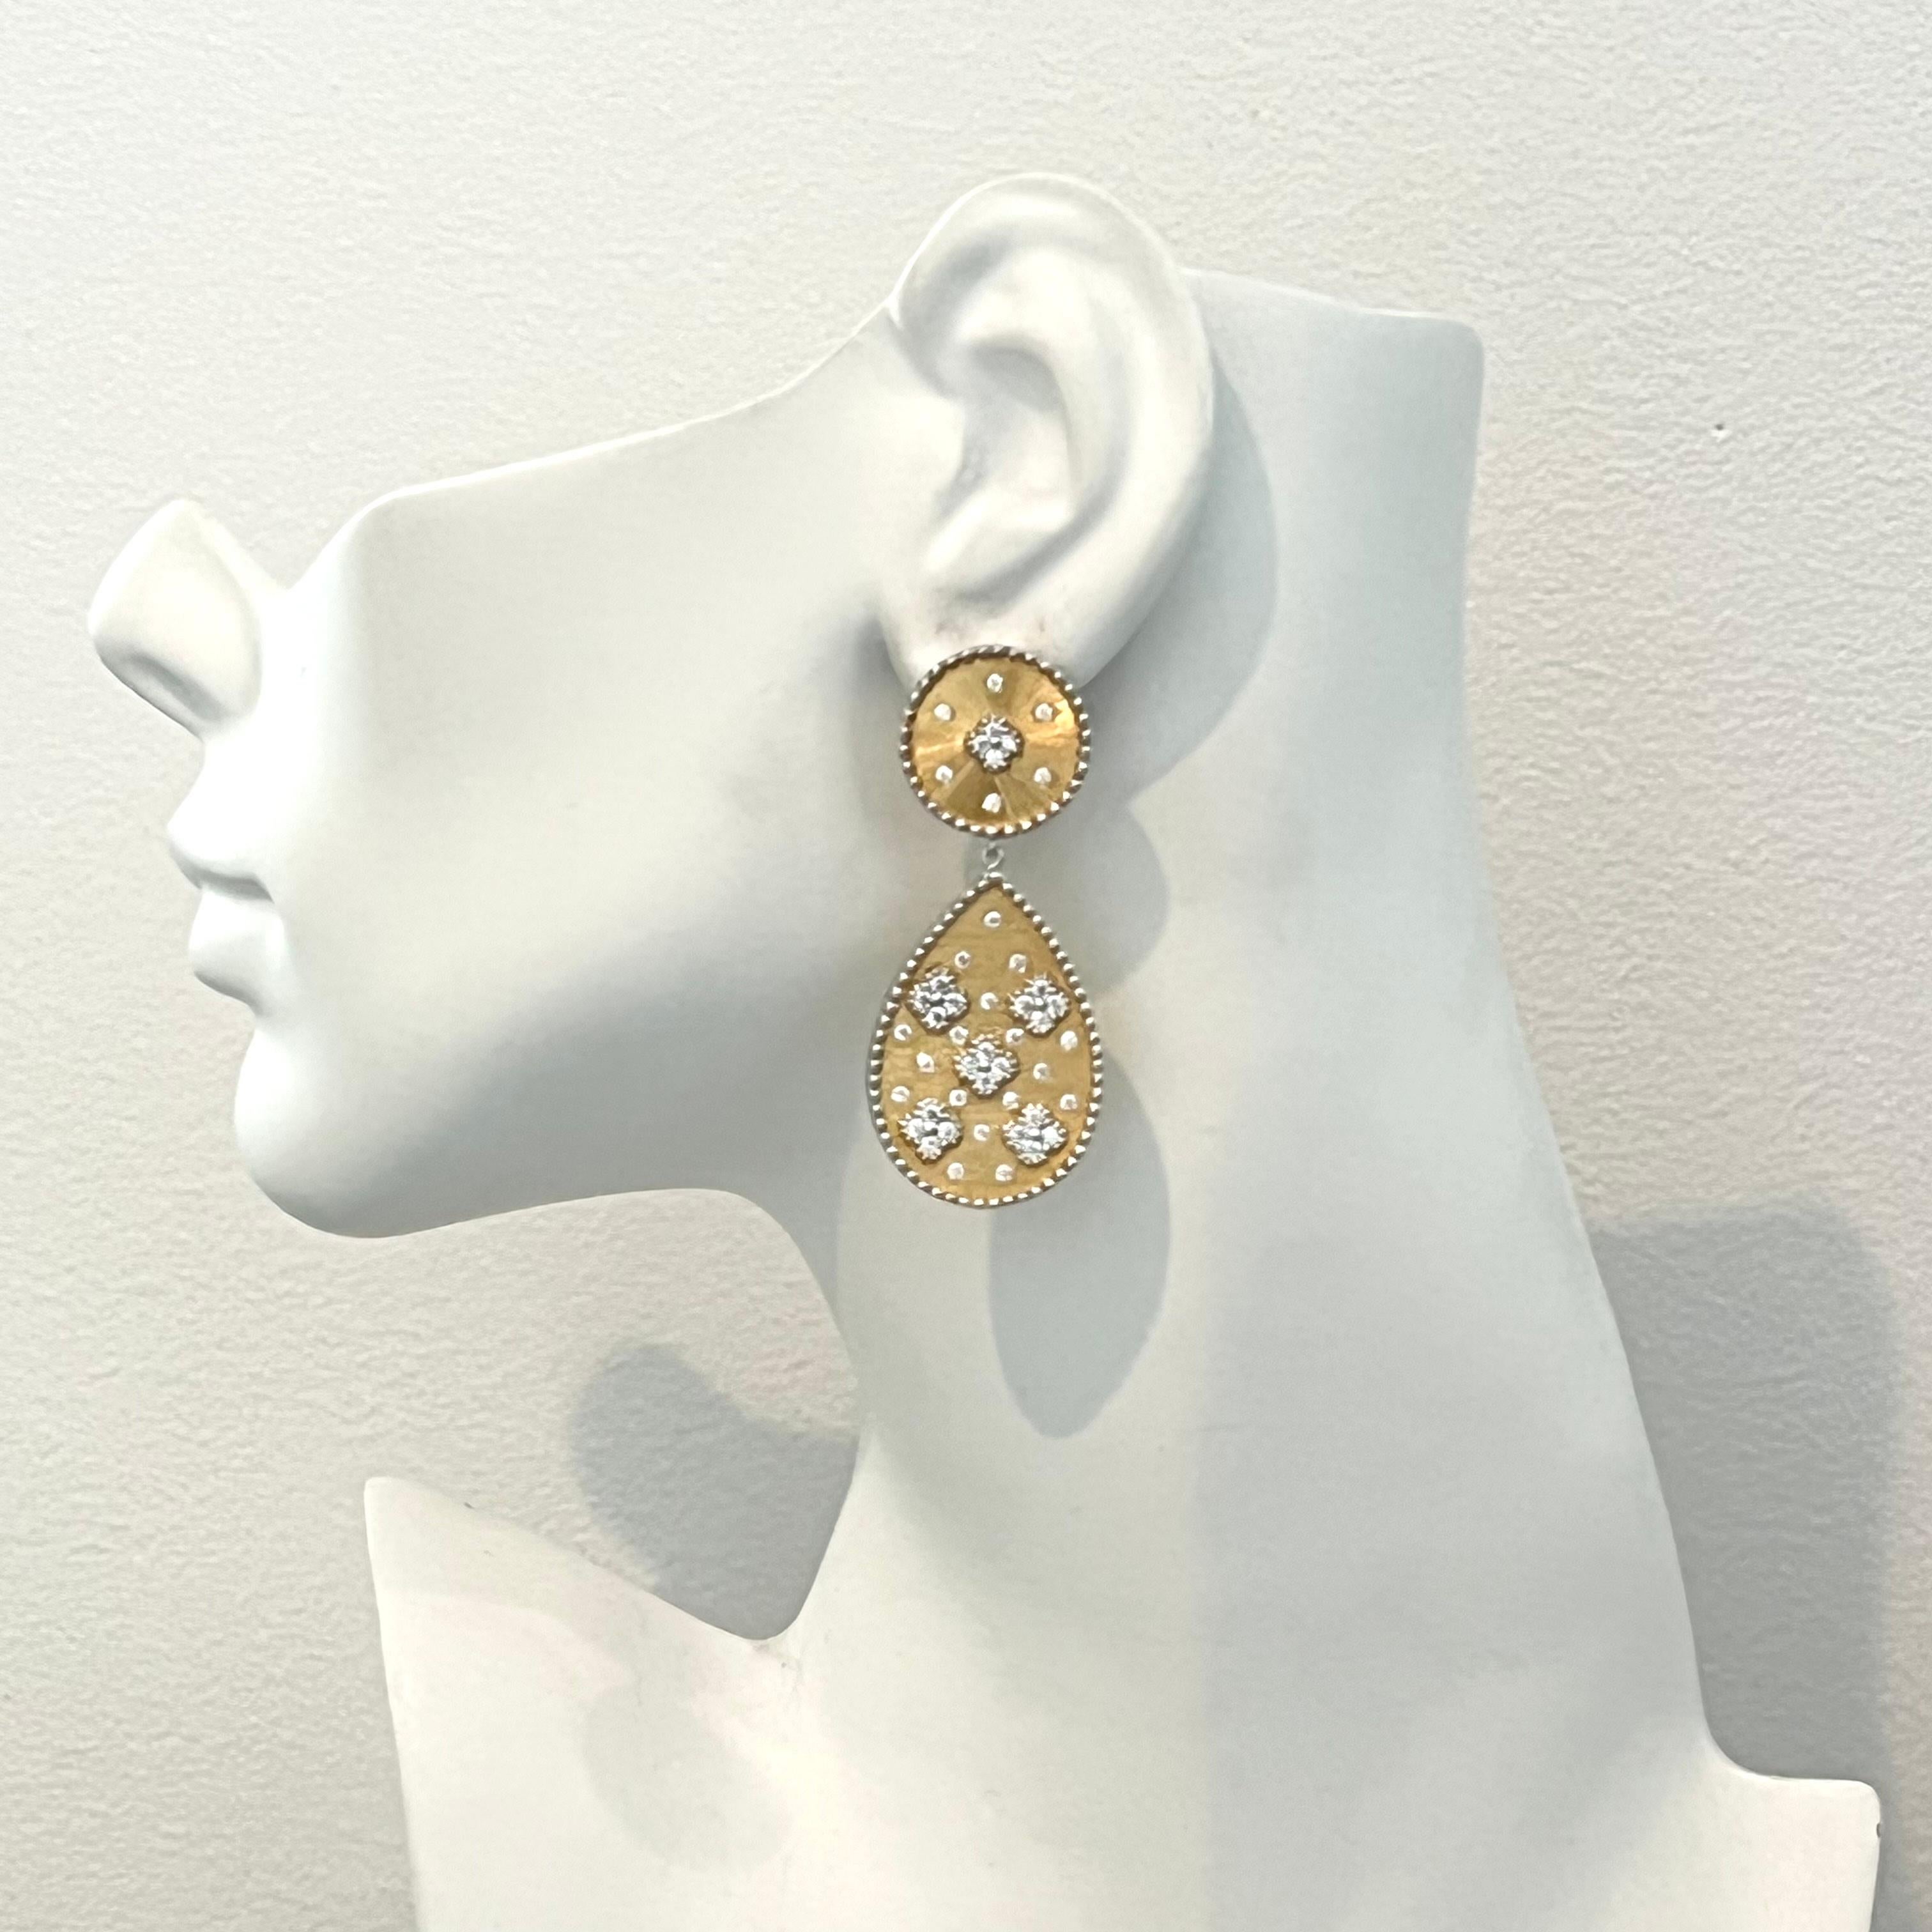 Stunning Bijoux Num Clover Pattern Pear Shape Drop Vermeil Earrings

These fabulous earrings feature 94pcs of round simulated diamonds handset in 18k yellow gold vermeil over sterling silver, finished with handmade Italian-style 